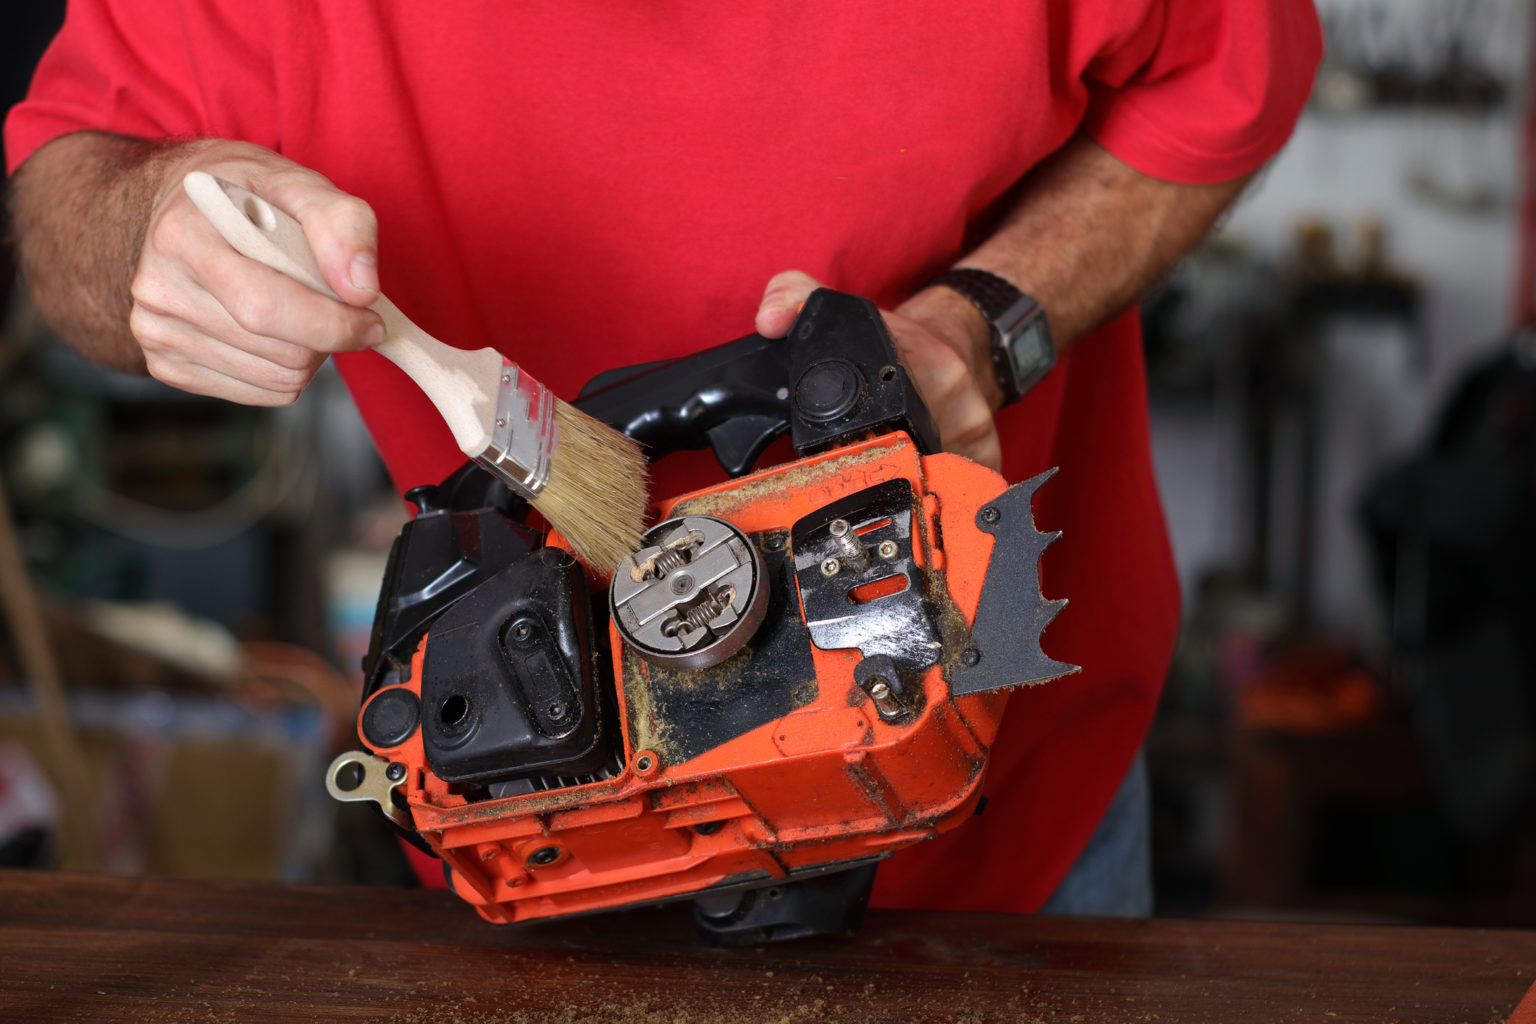 cleaning of the small chainsaw by a person in the garage